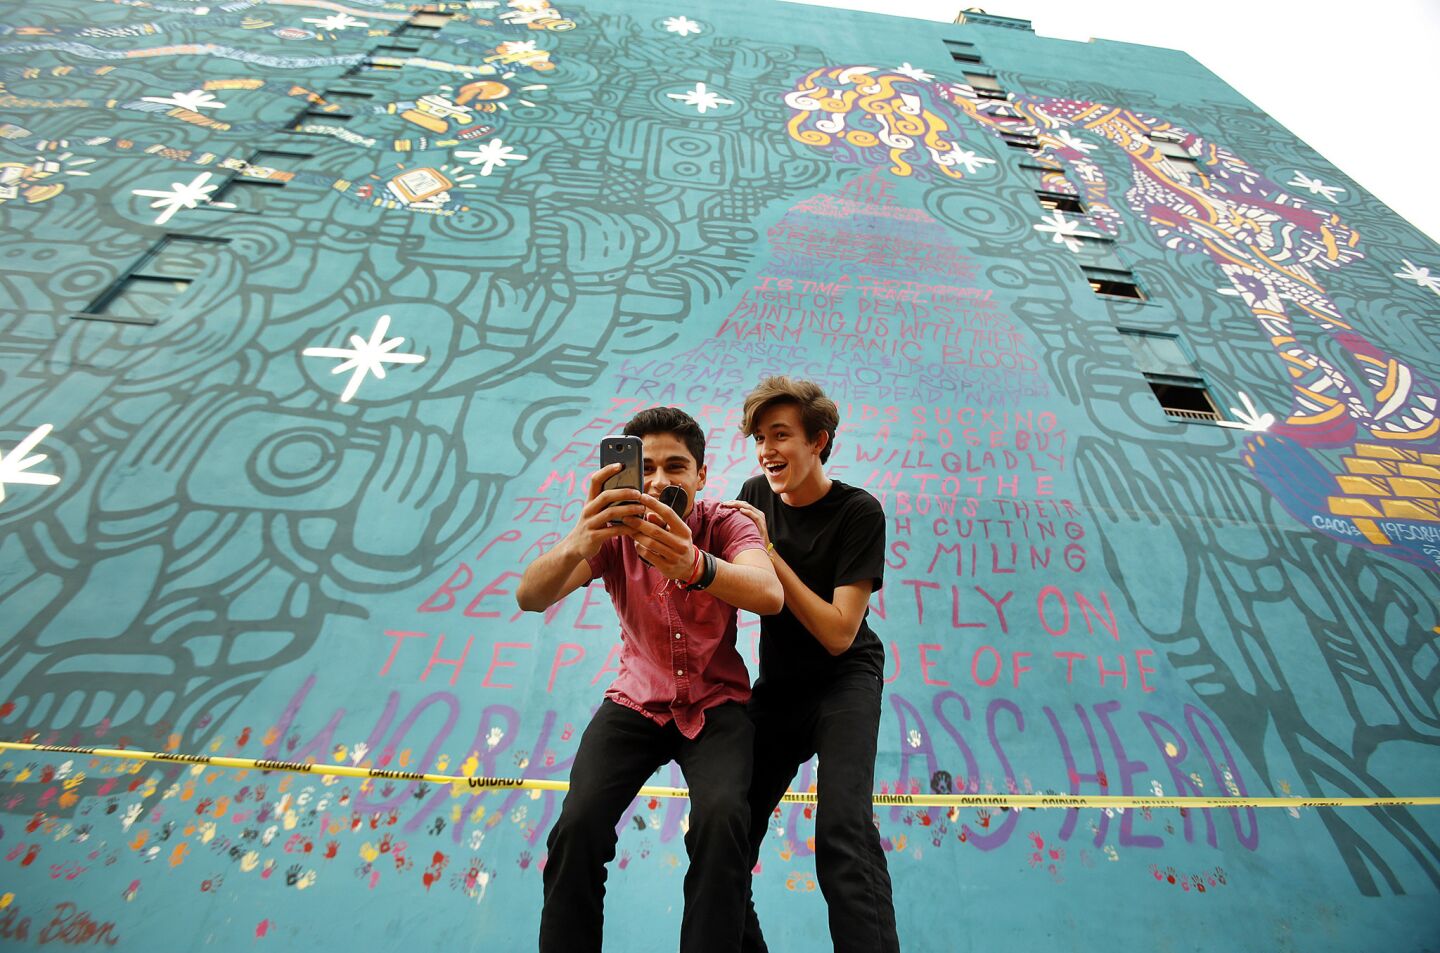 Tony Davia, left, takes a photo with Lucas Connor, both bandmates from Laguna Beach, in front of a mural on the Santa Fe Building at 539 S. Los Angeles Street in downtown L.A., created by the artist Young & Sick for the band Foster the People.